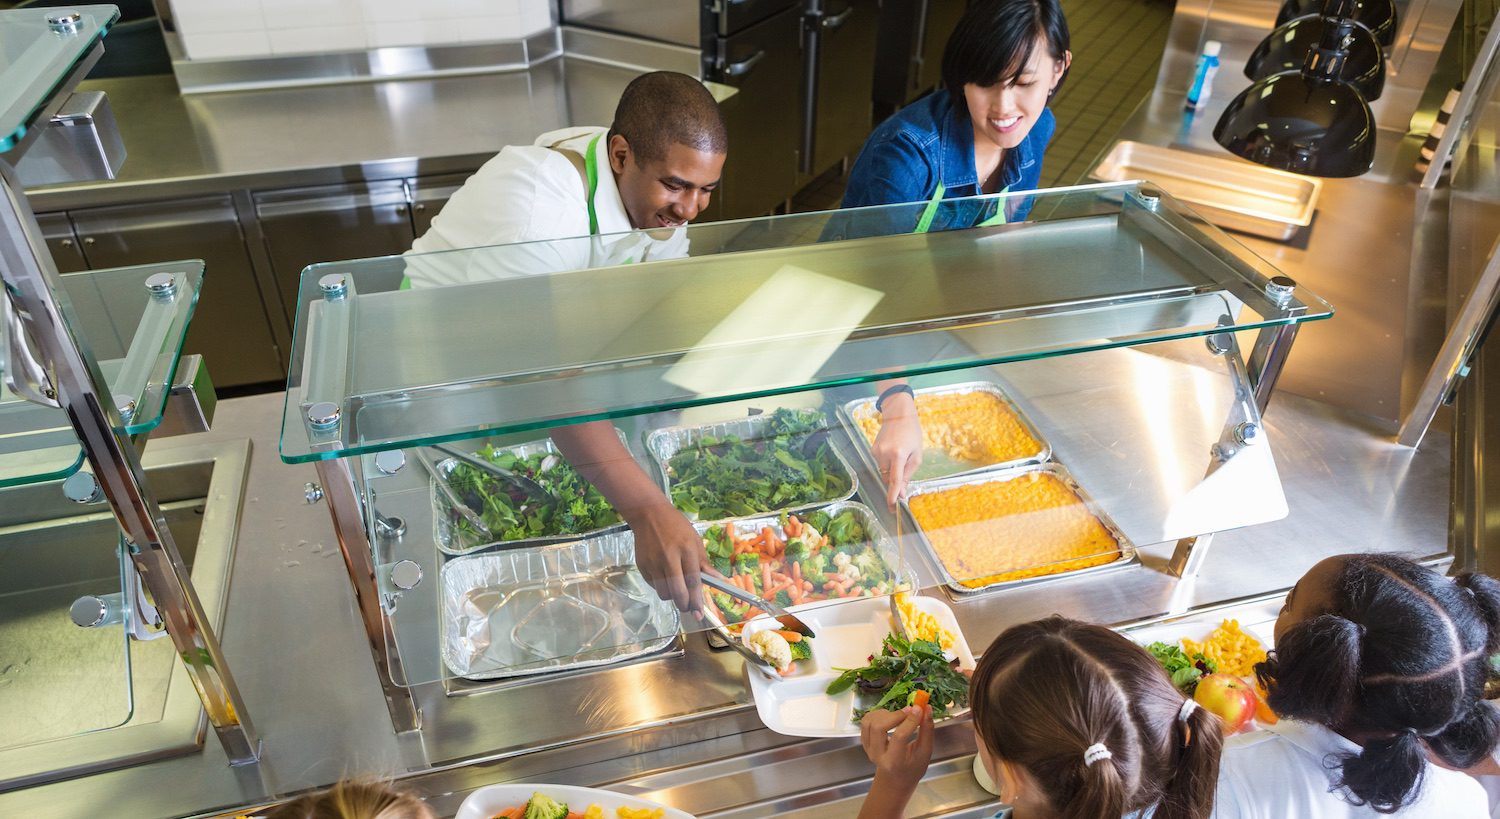 Cafeteria workers provide healthy food options in a public cafeteria.